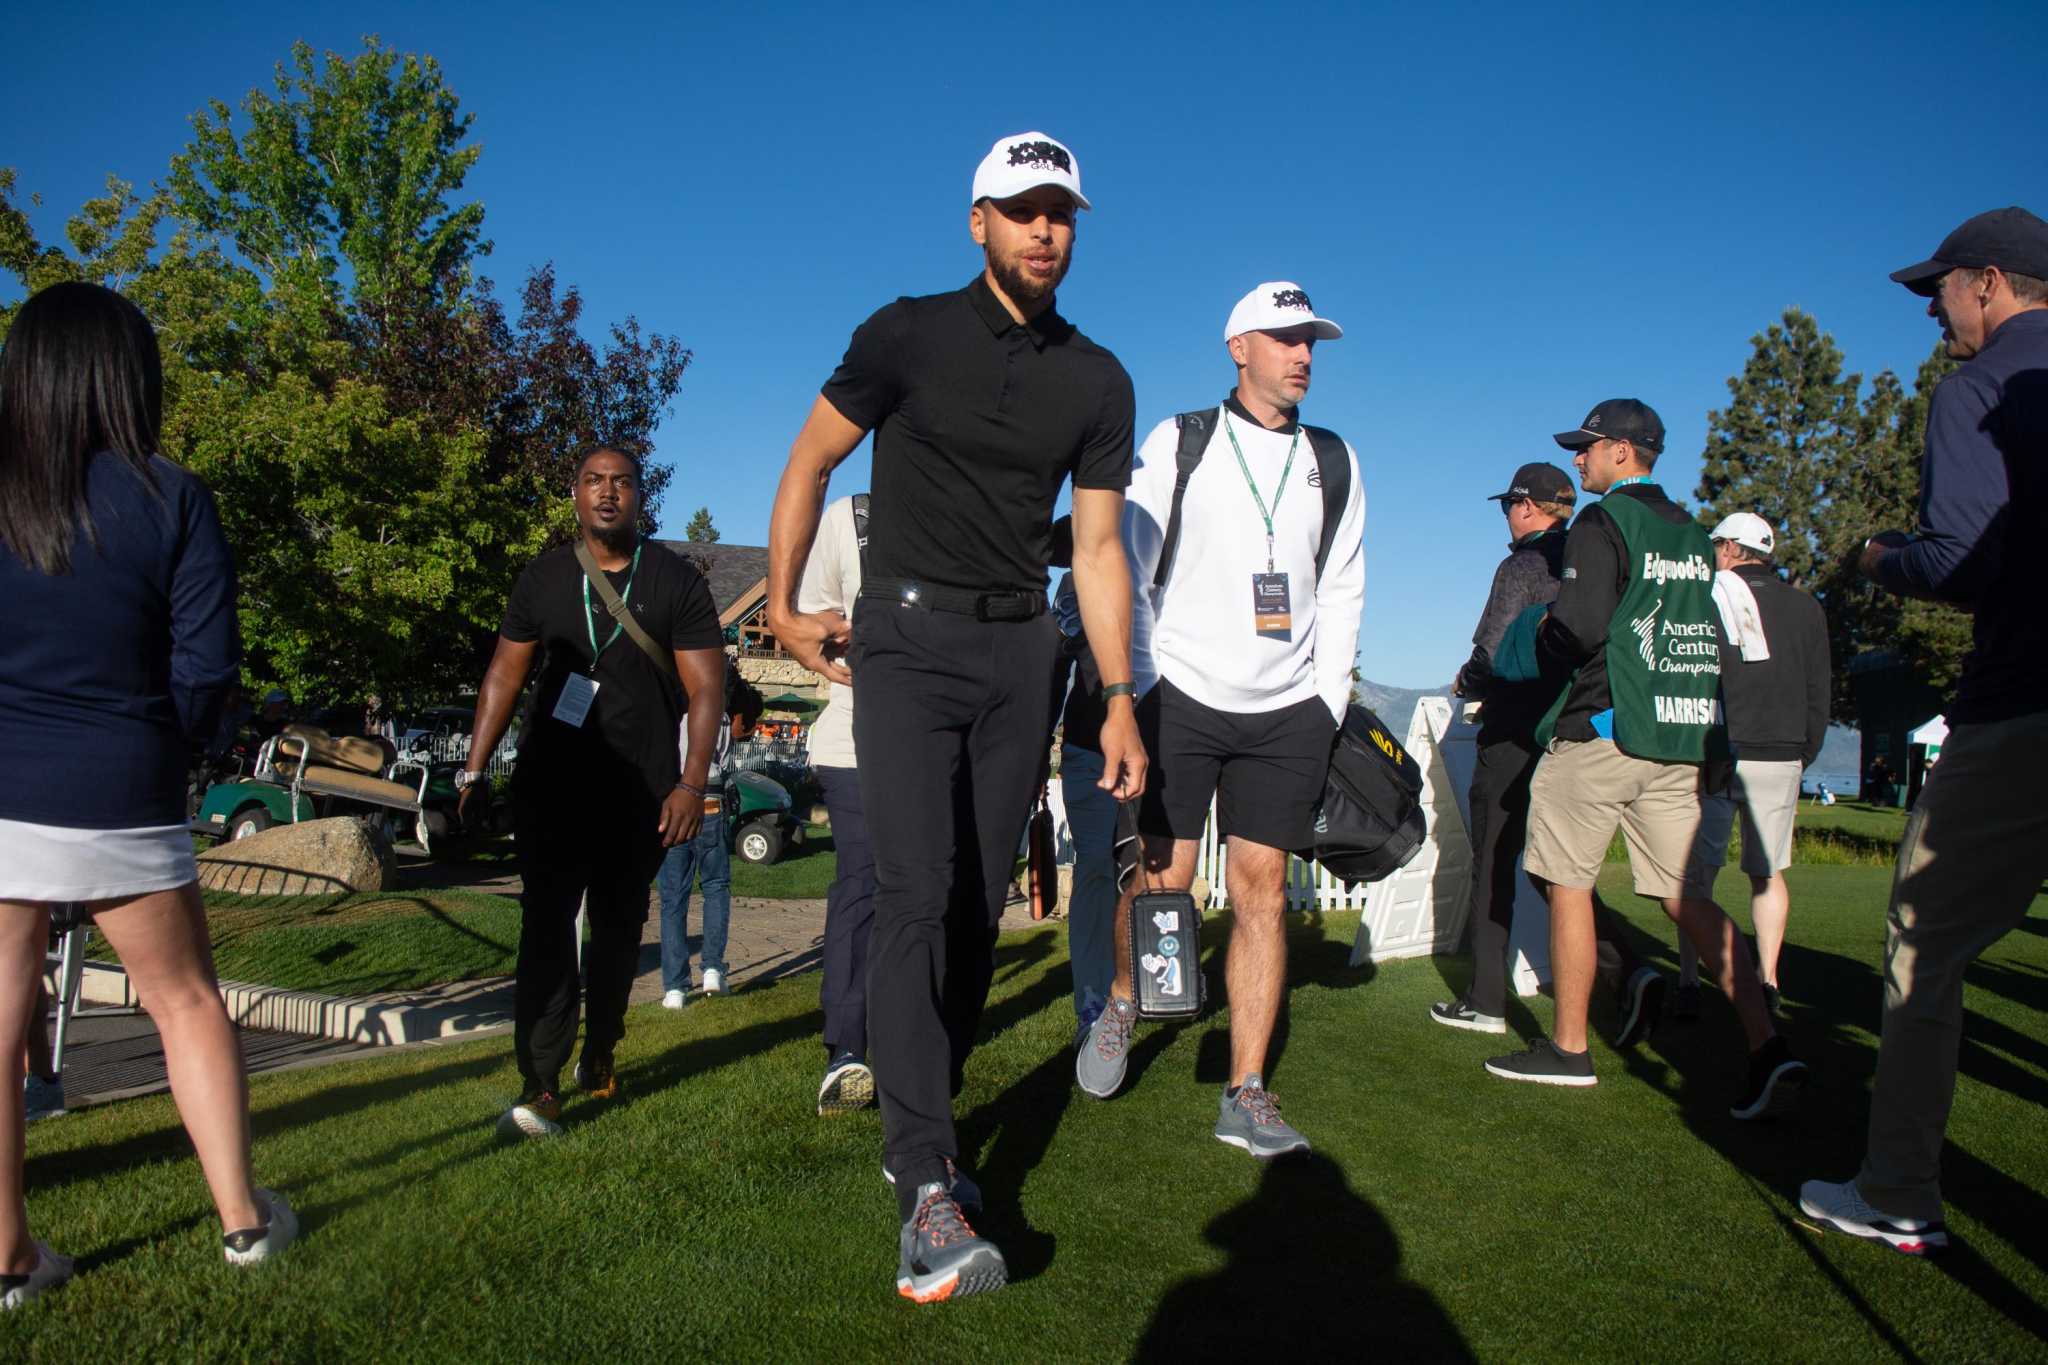 Stephen Curry hits 97-yard shot in Tahoe celebrity golf tourney